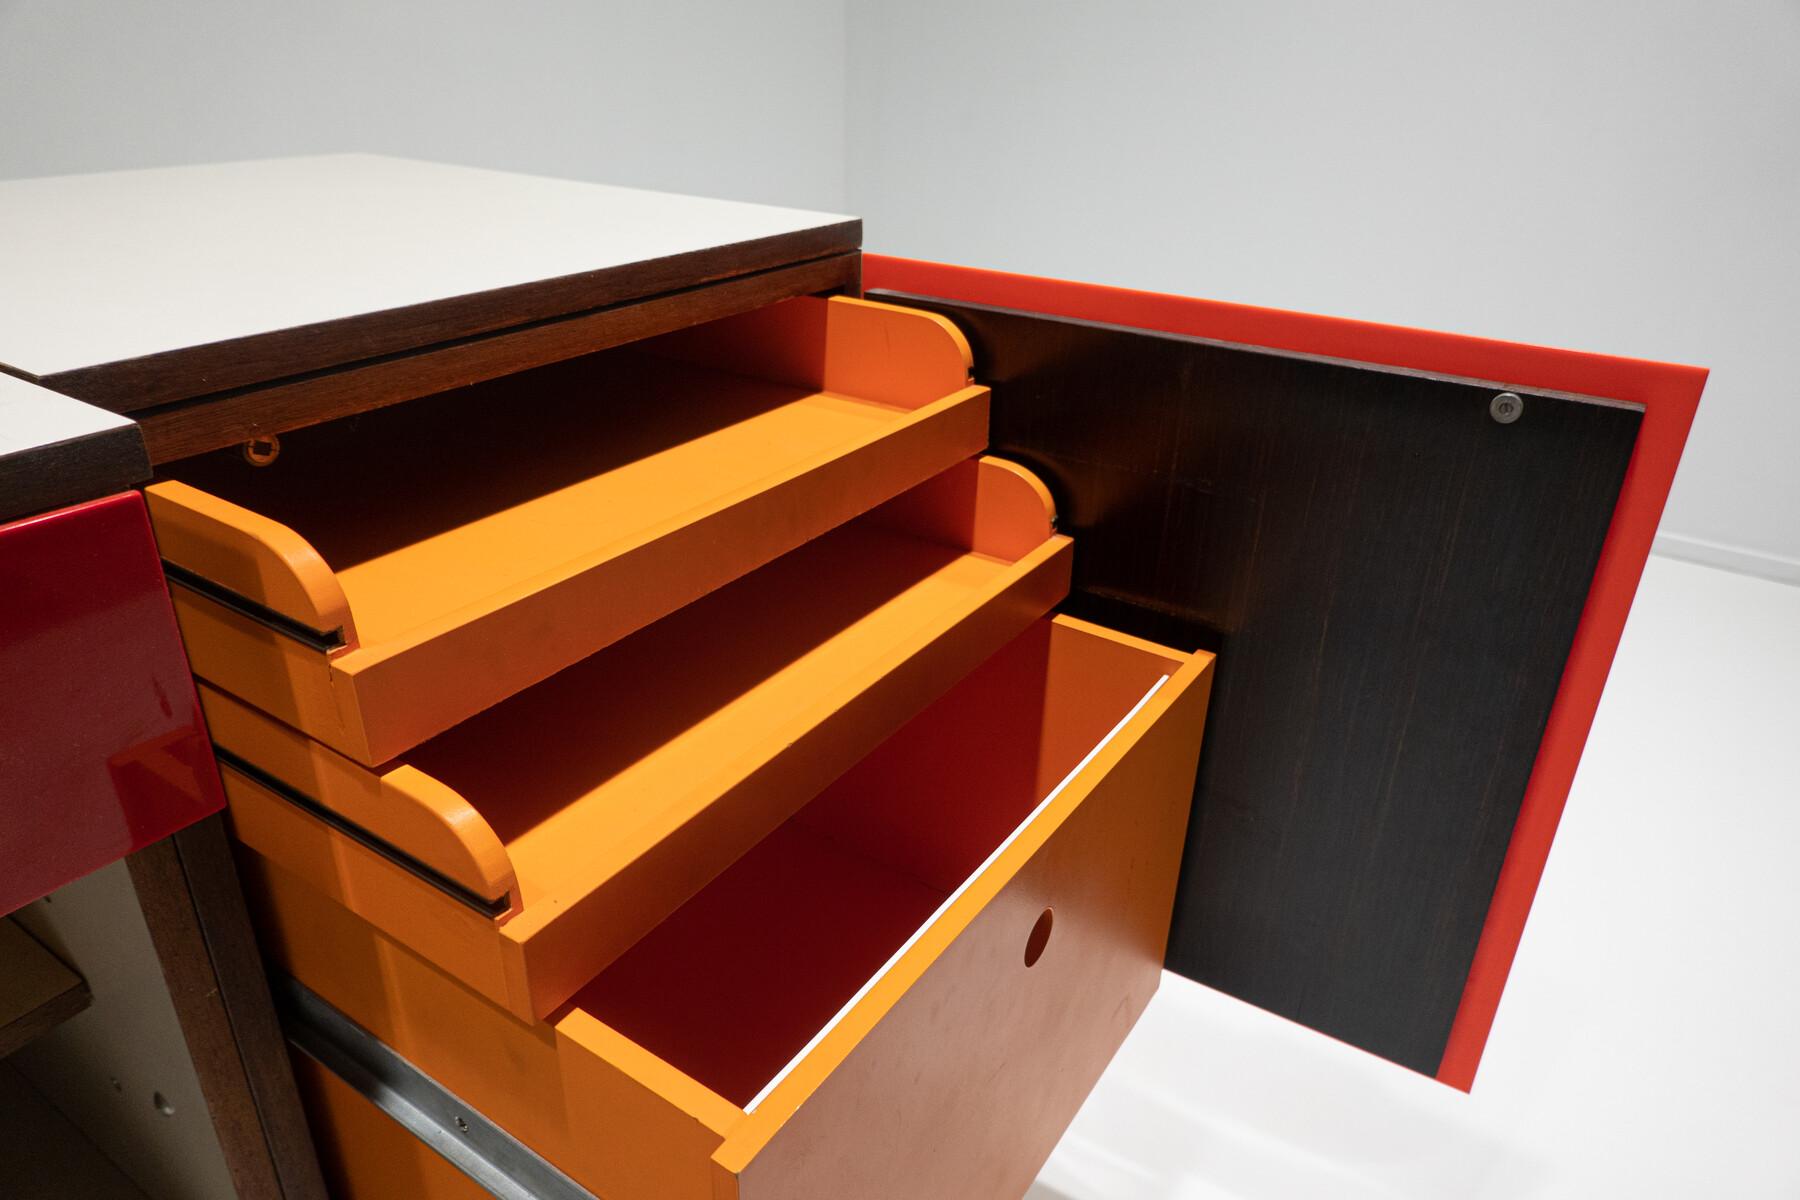 Mid-Century Modern desk with sliding top by Raymond Loewy, 1960s.